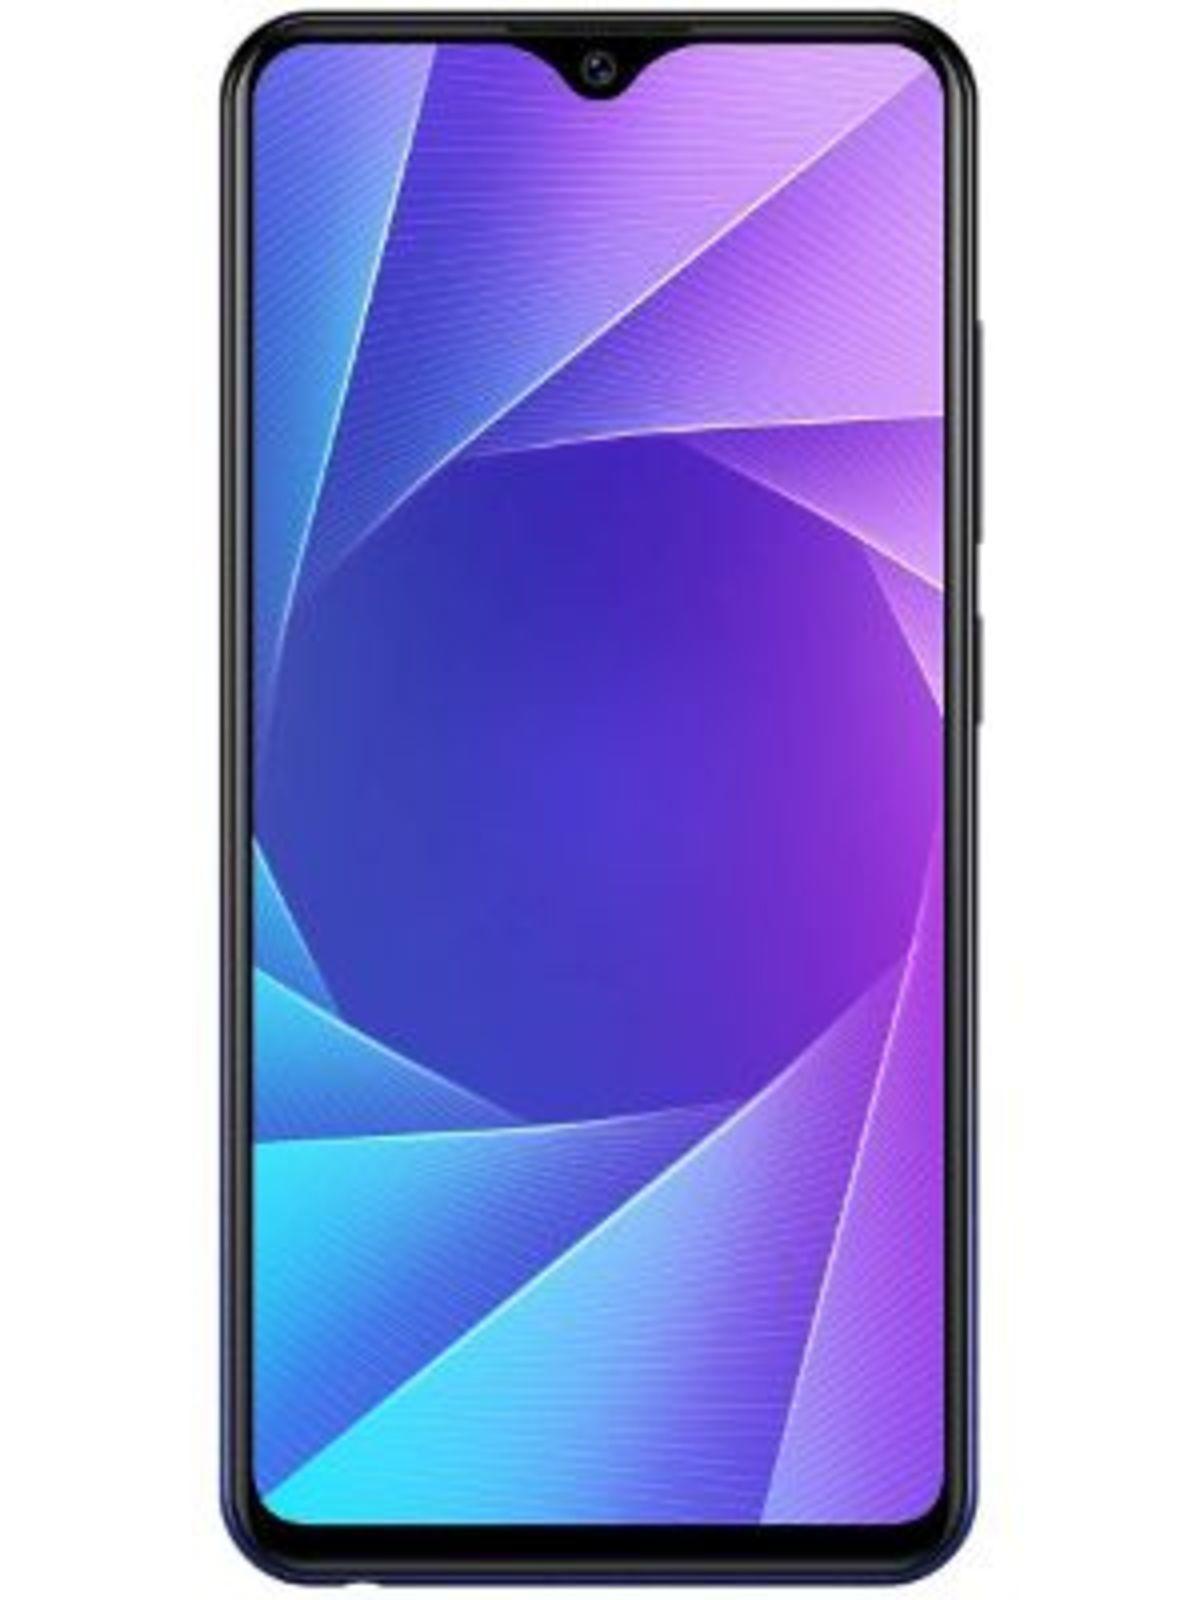 Vivo Y95 Price in India, Full Specifications (4th Mar 2023) at Gadgets Now